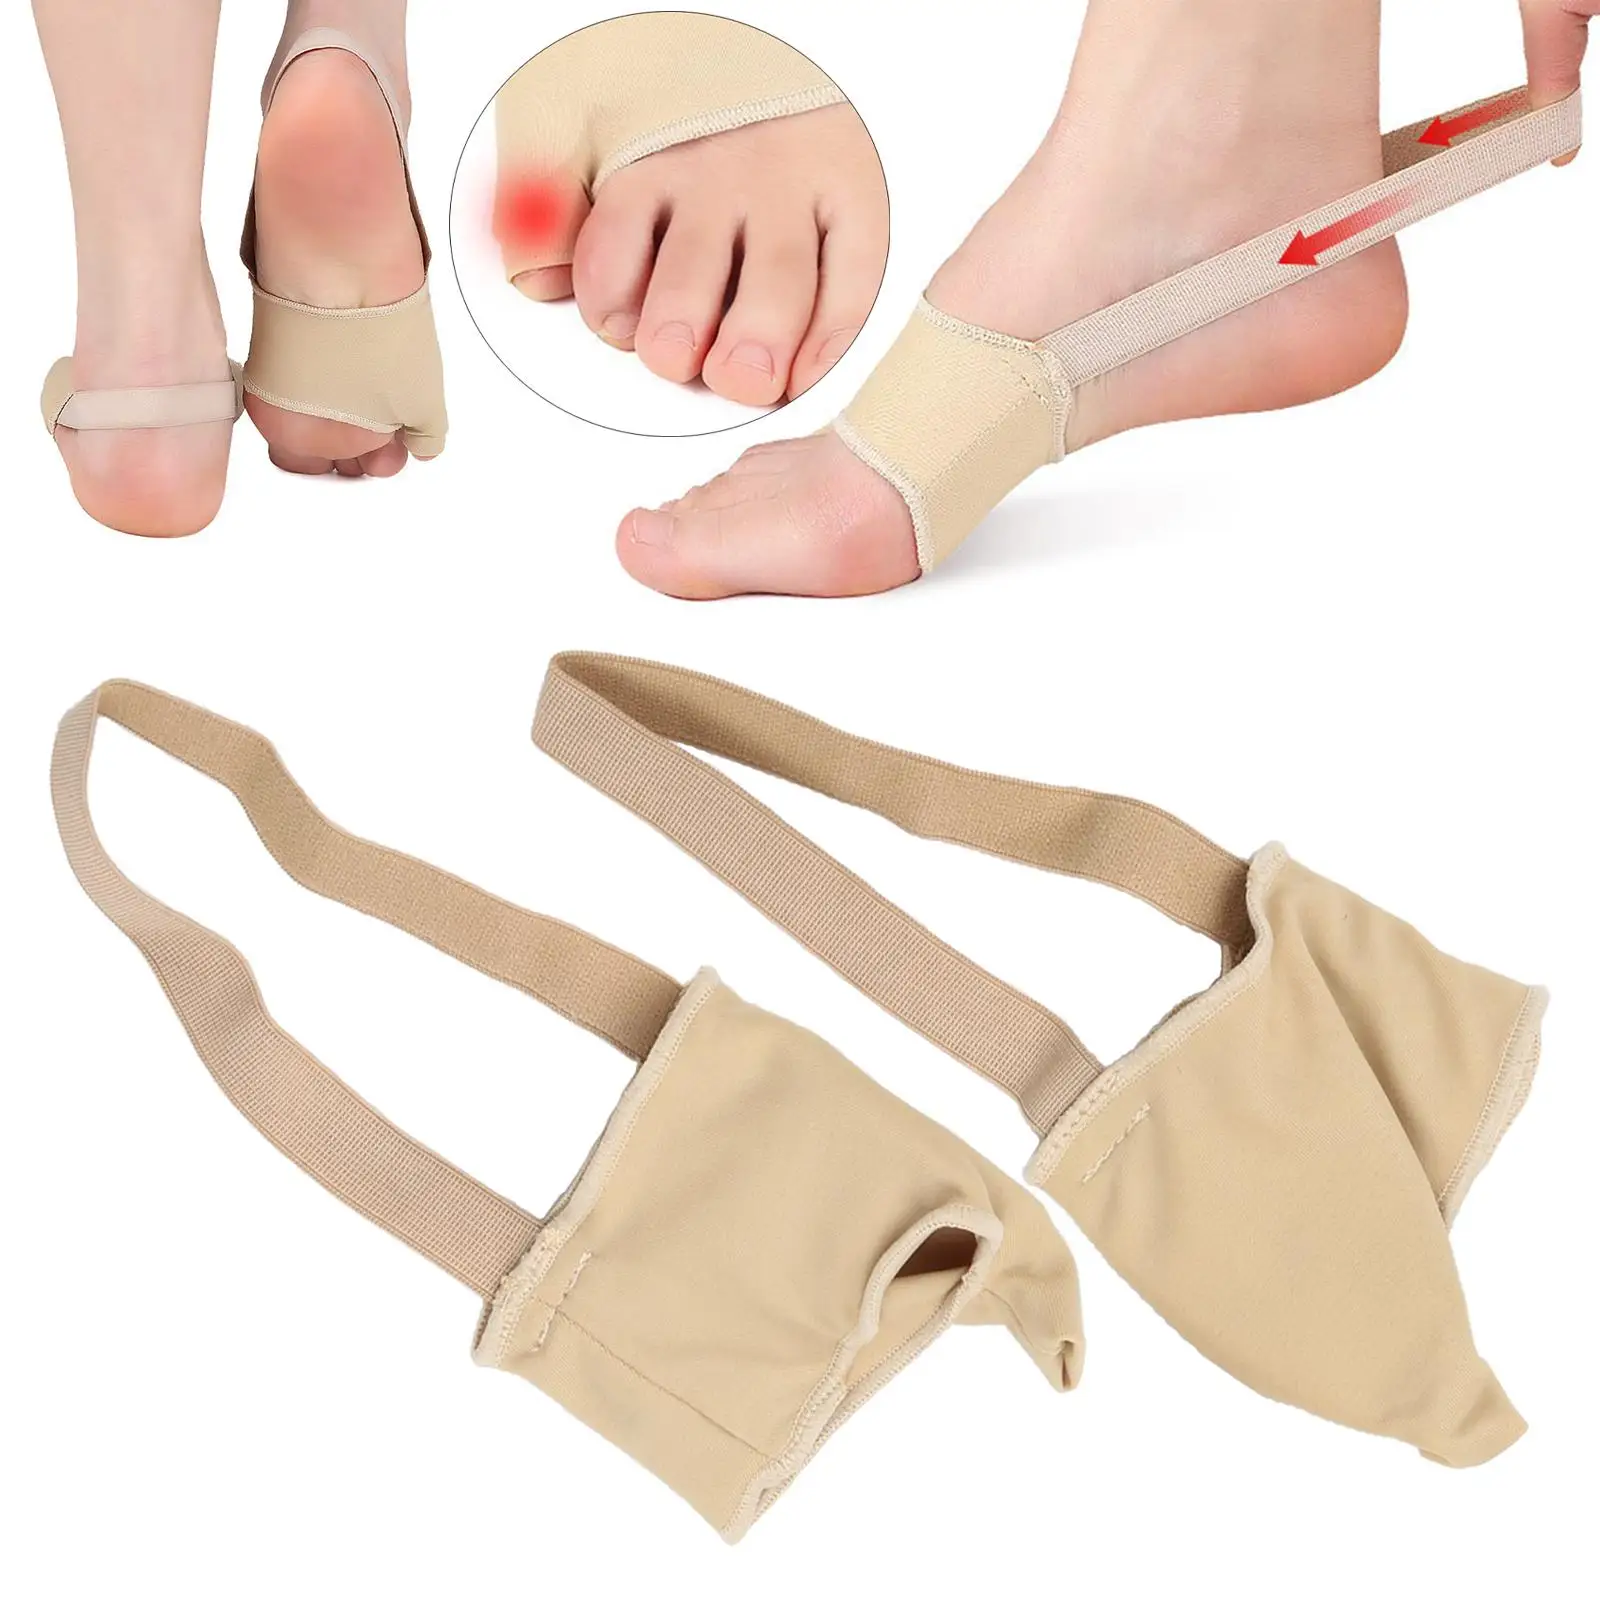 Tailor`S Toe Straightener Guard Little Toe Separator Protector for Hallux Valgus Bunion Soft Day Night Support Provides Padding